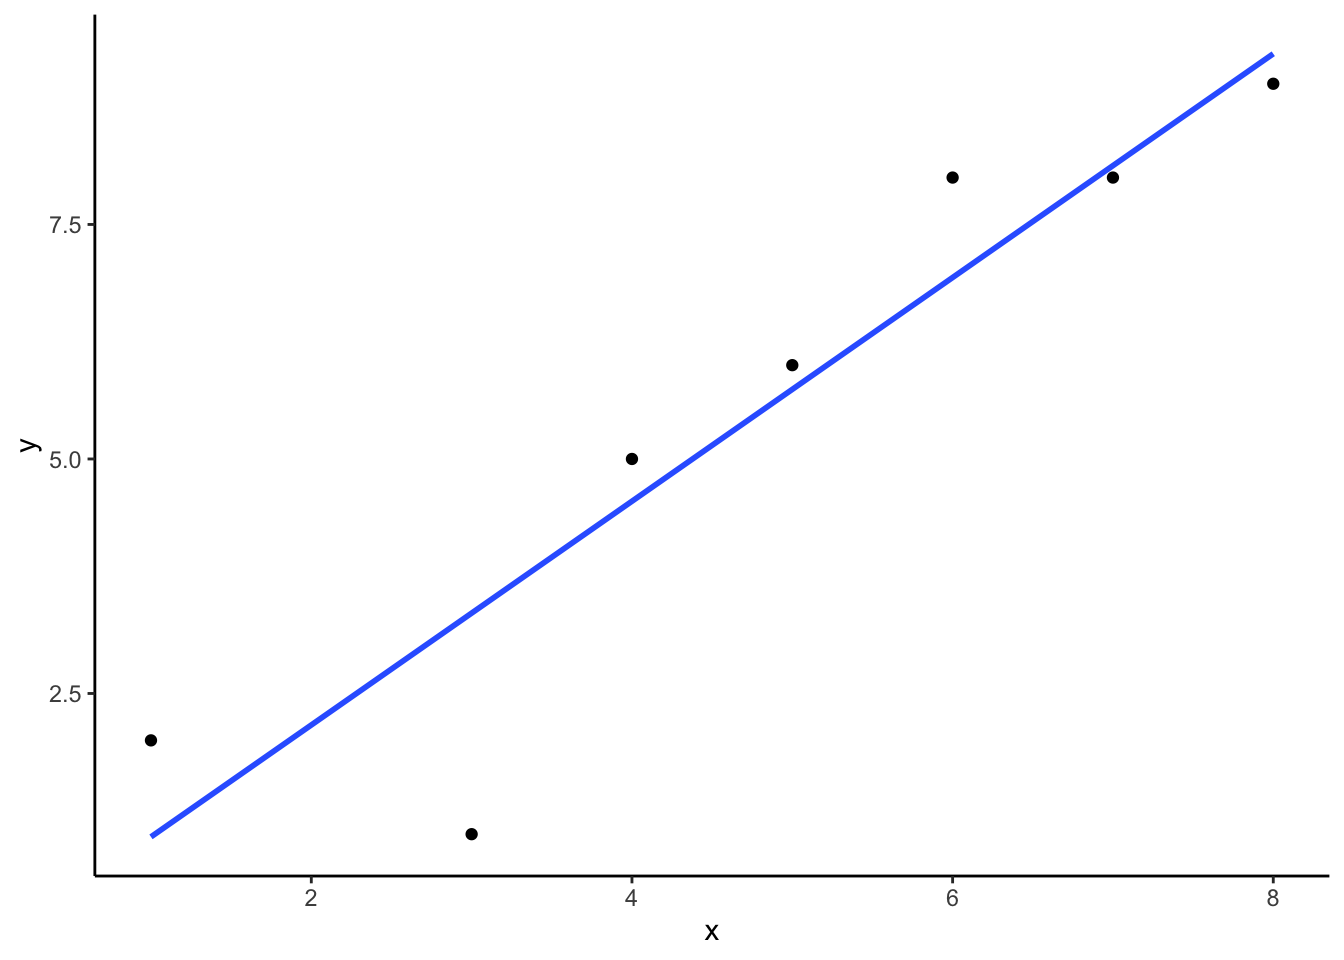 An example regression line with confidence bands going through a few data points in a scatterplot